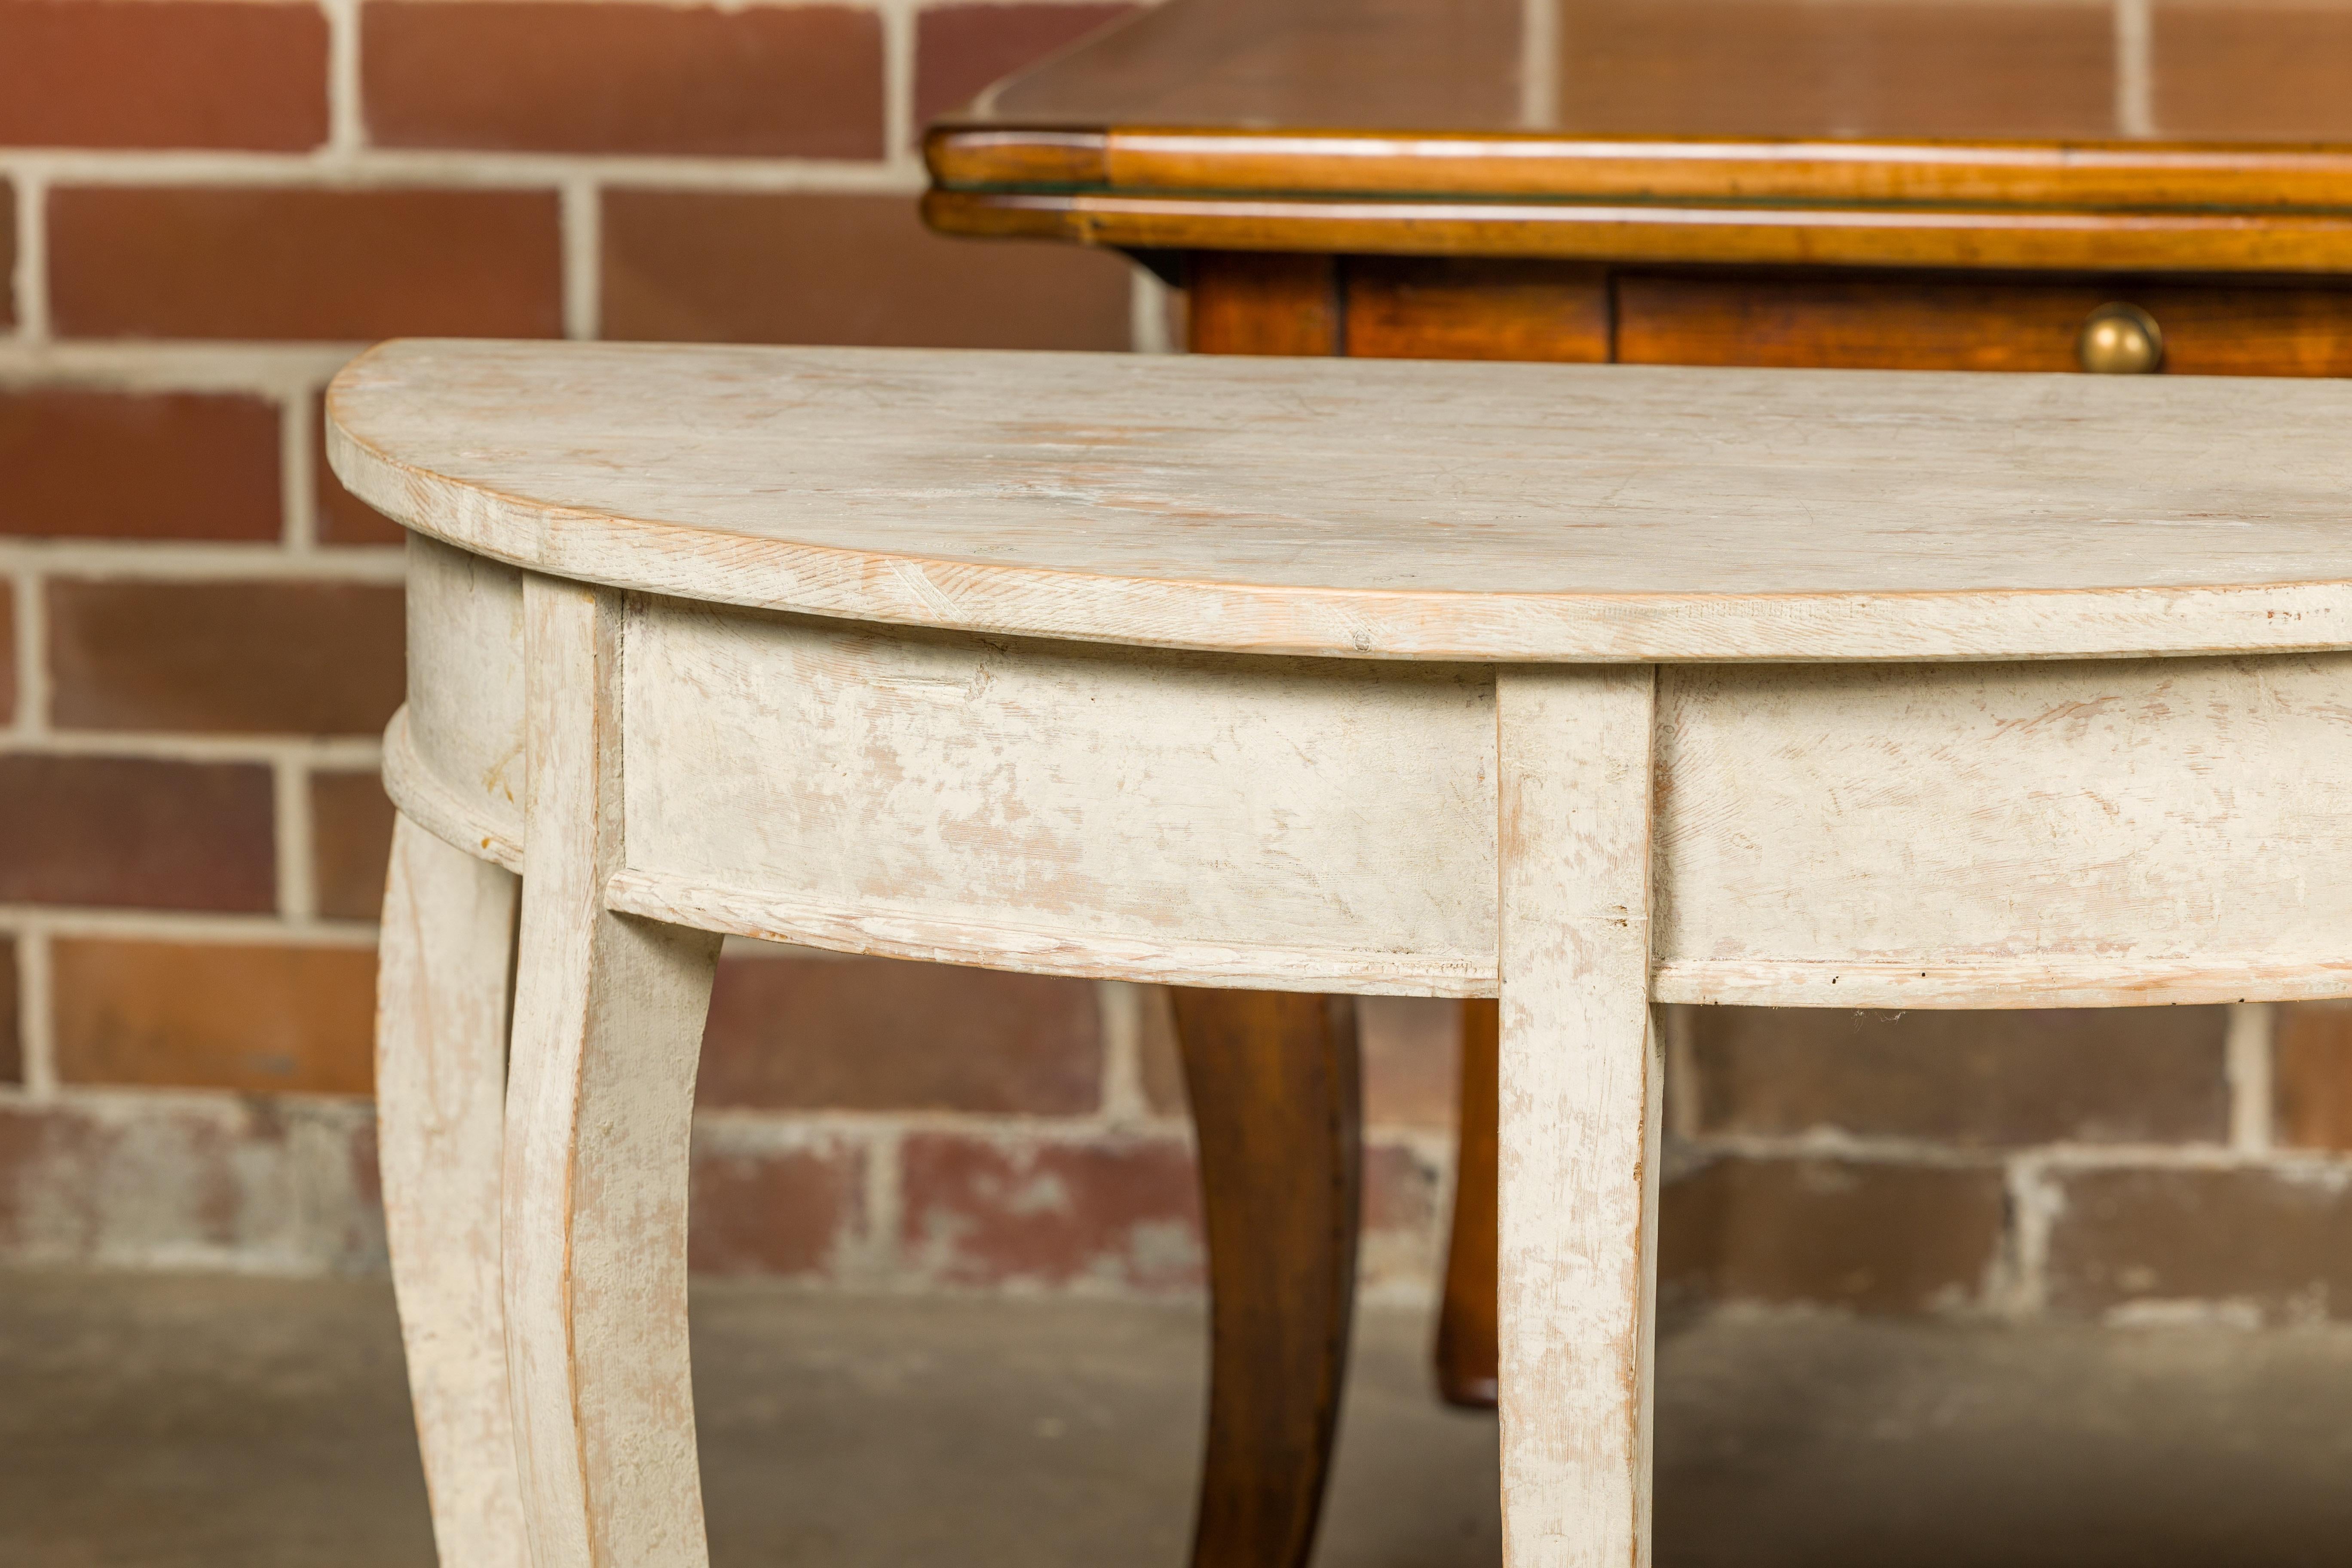 Wood Swedish 19th Century Painted Demilune Tables with Cabriole Legs, a Pair For Sale